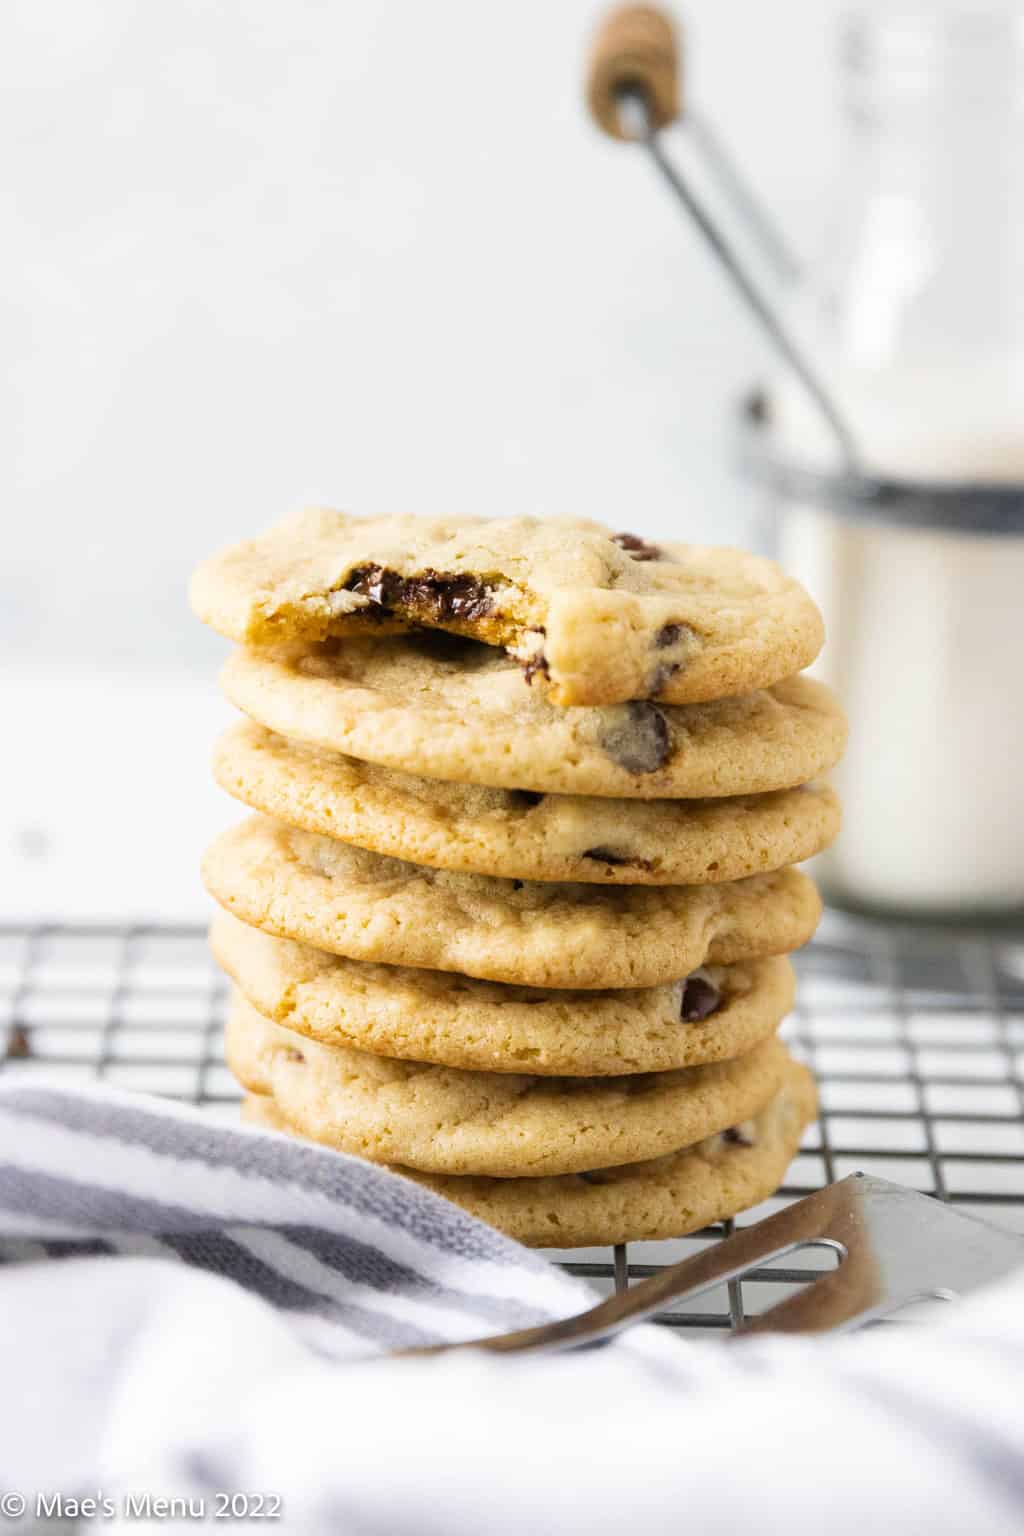 A stack of dairy free chocolate chip cookies with a bite taken out of the top one.